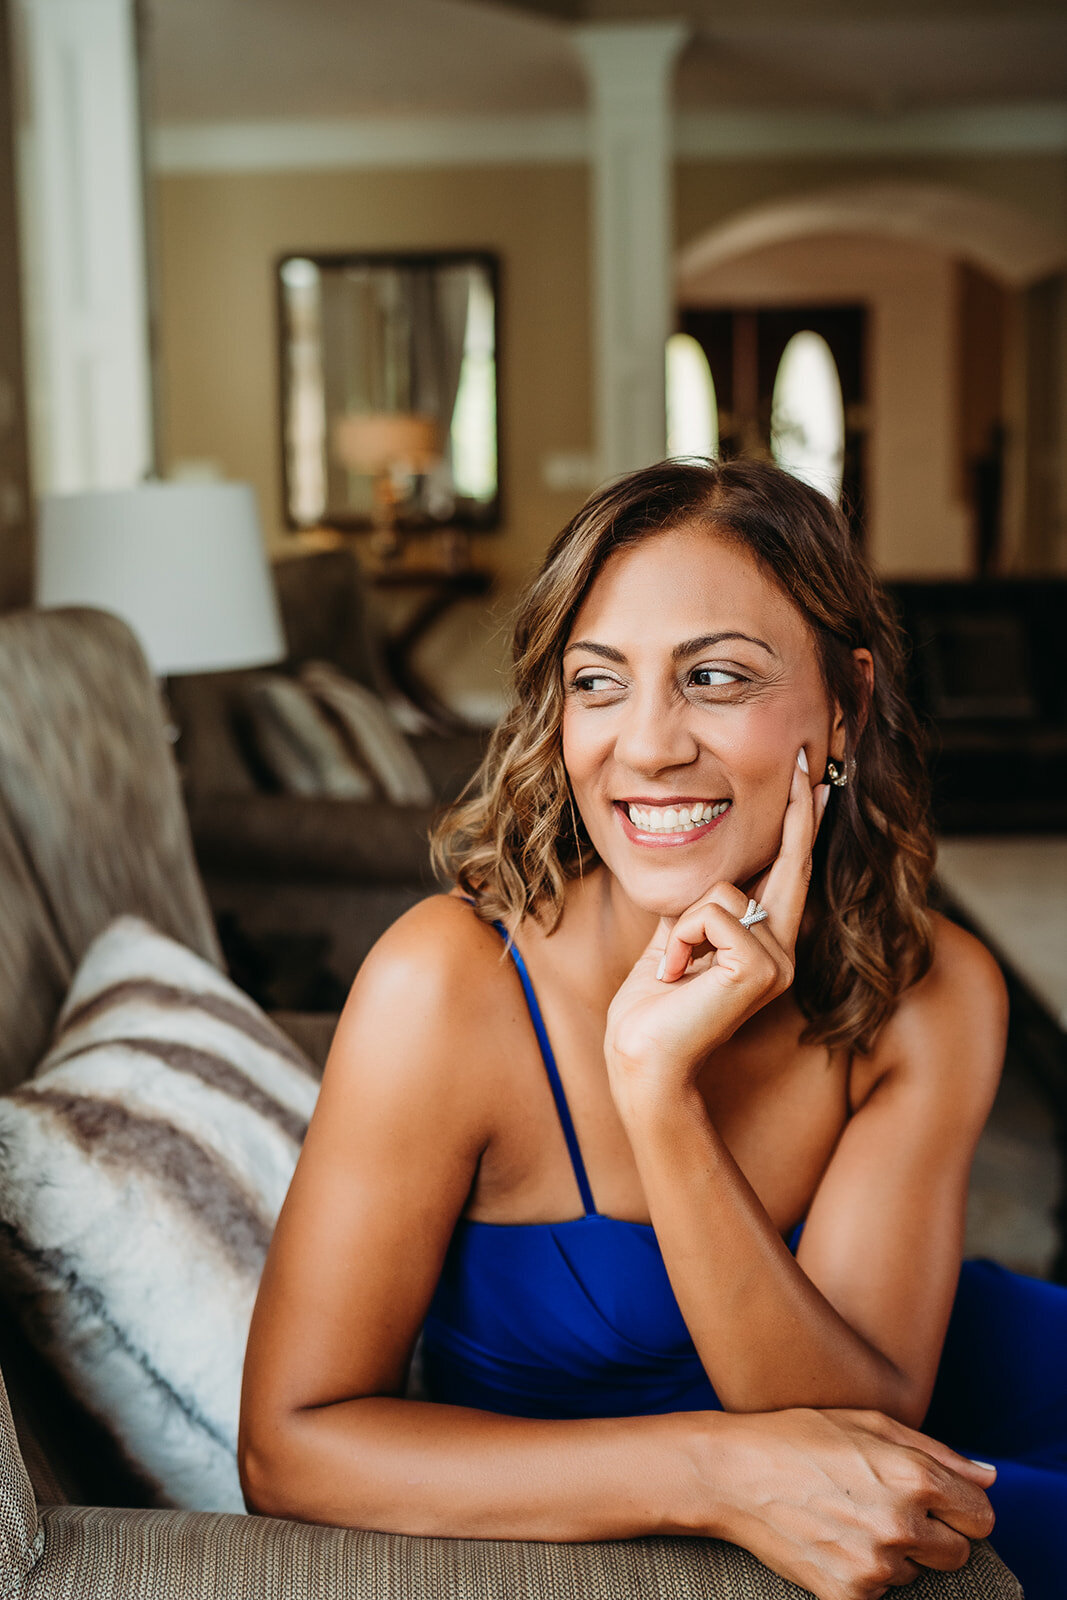 woman smiles while relaxing on a couch during brand photo session